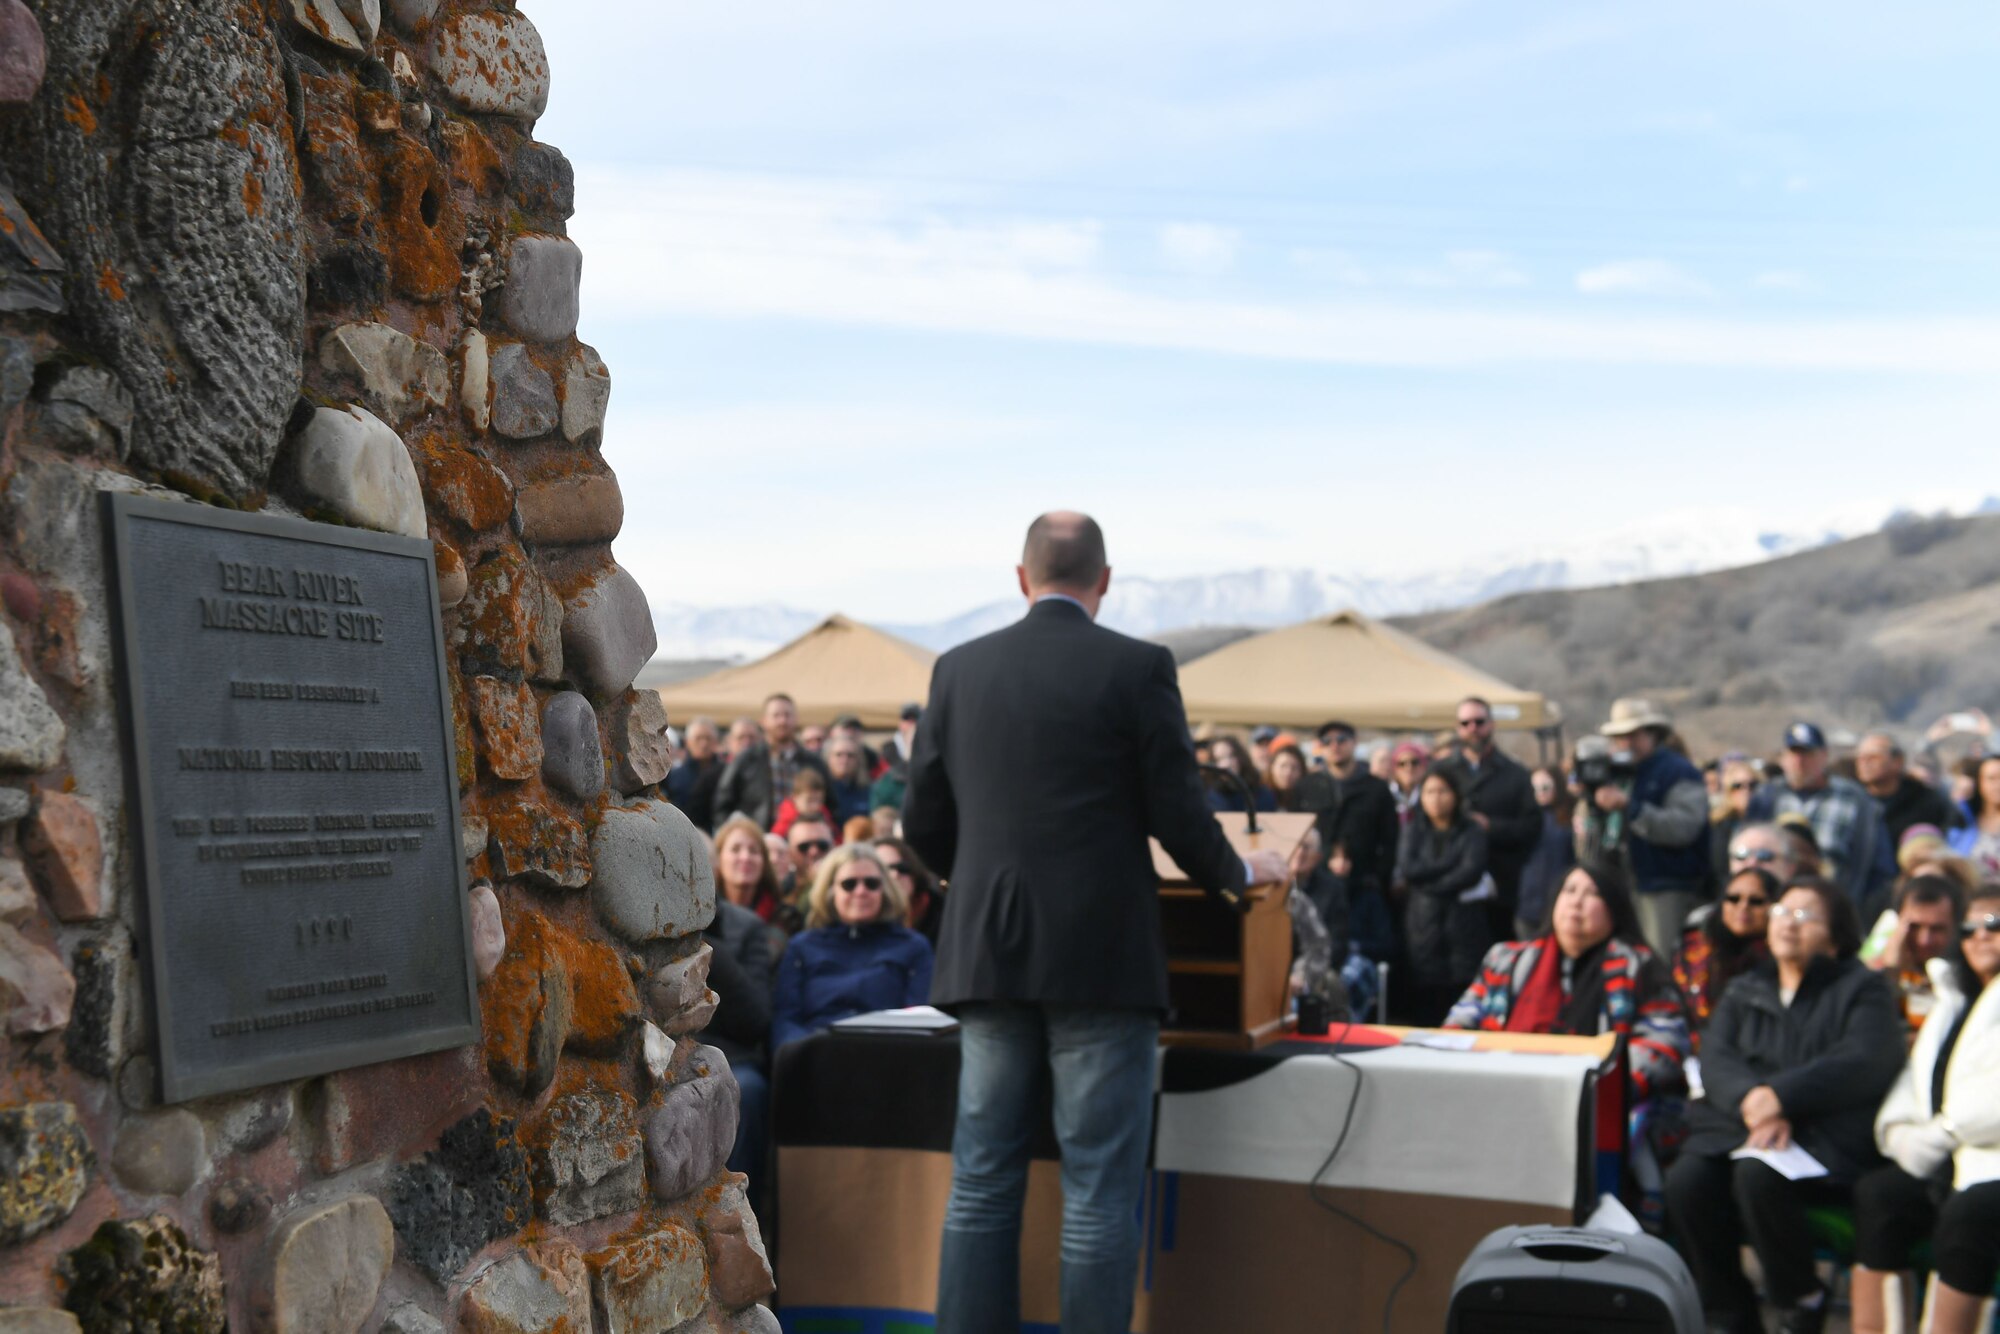 Lt. Governor Spencer Cox speaks during a remembrance ceremony of the Bear River Massacre near Preston, Idaho. (U.S. Air Force photo by Cynthia Griggs)